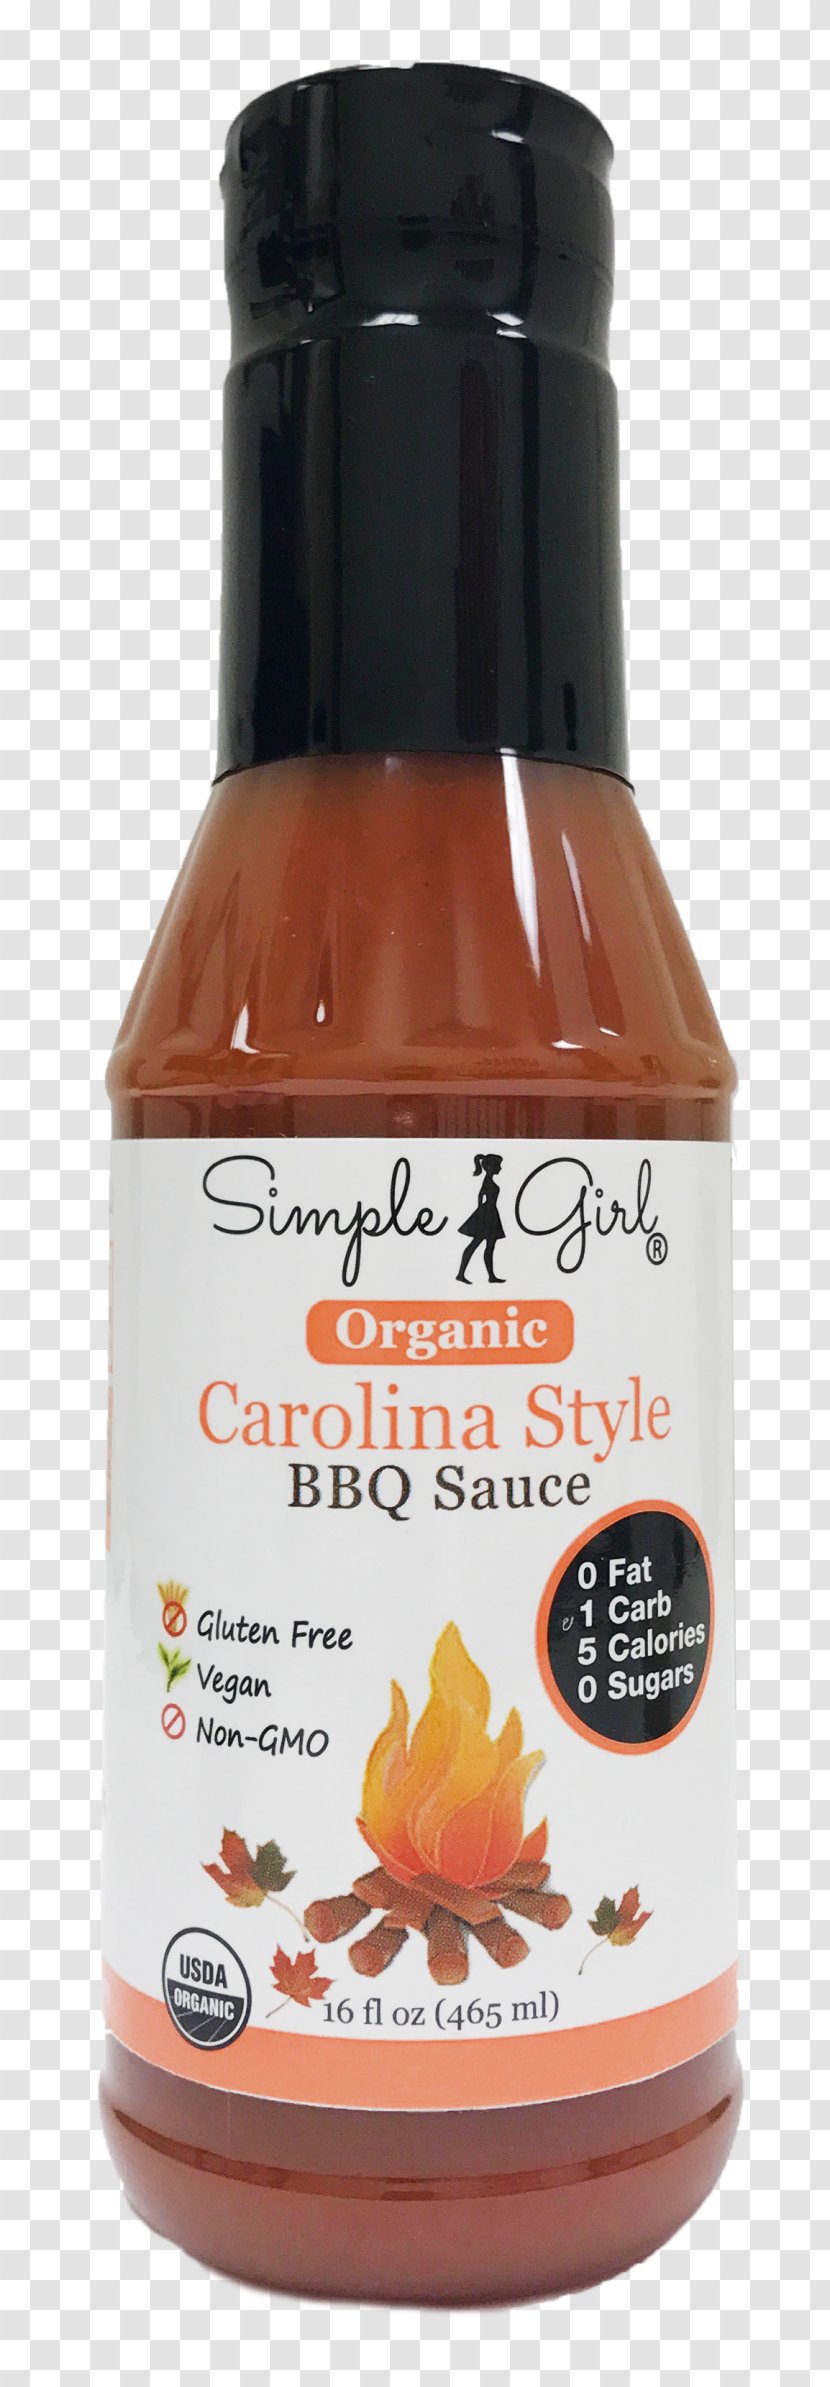 Sweet Chili Sauce Barbecue Gluten-free Diet Hot Low-carbohydrate - Lowcarbohydrate - Flavor Transparent PNG